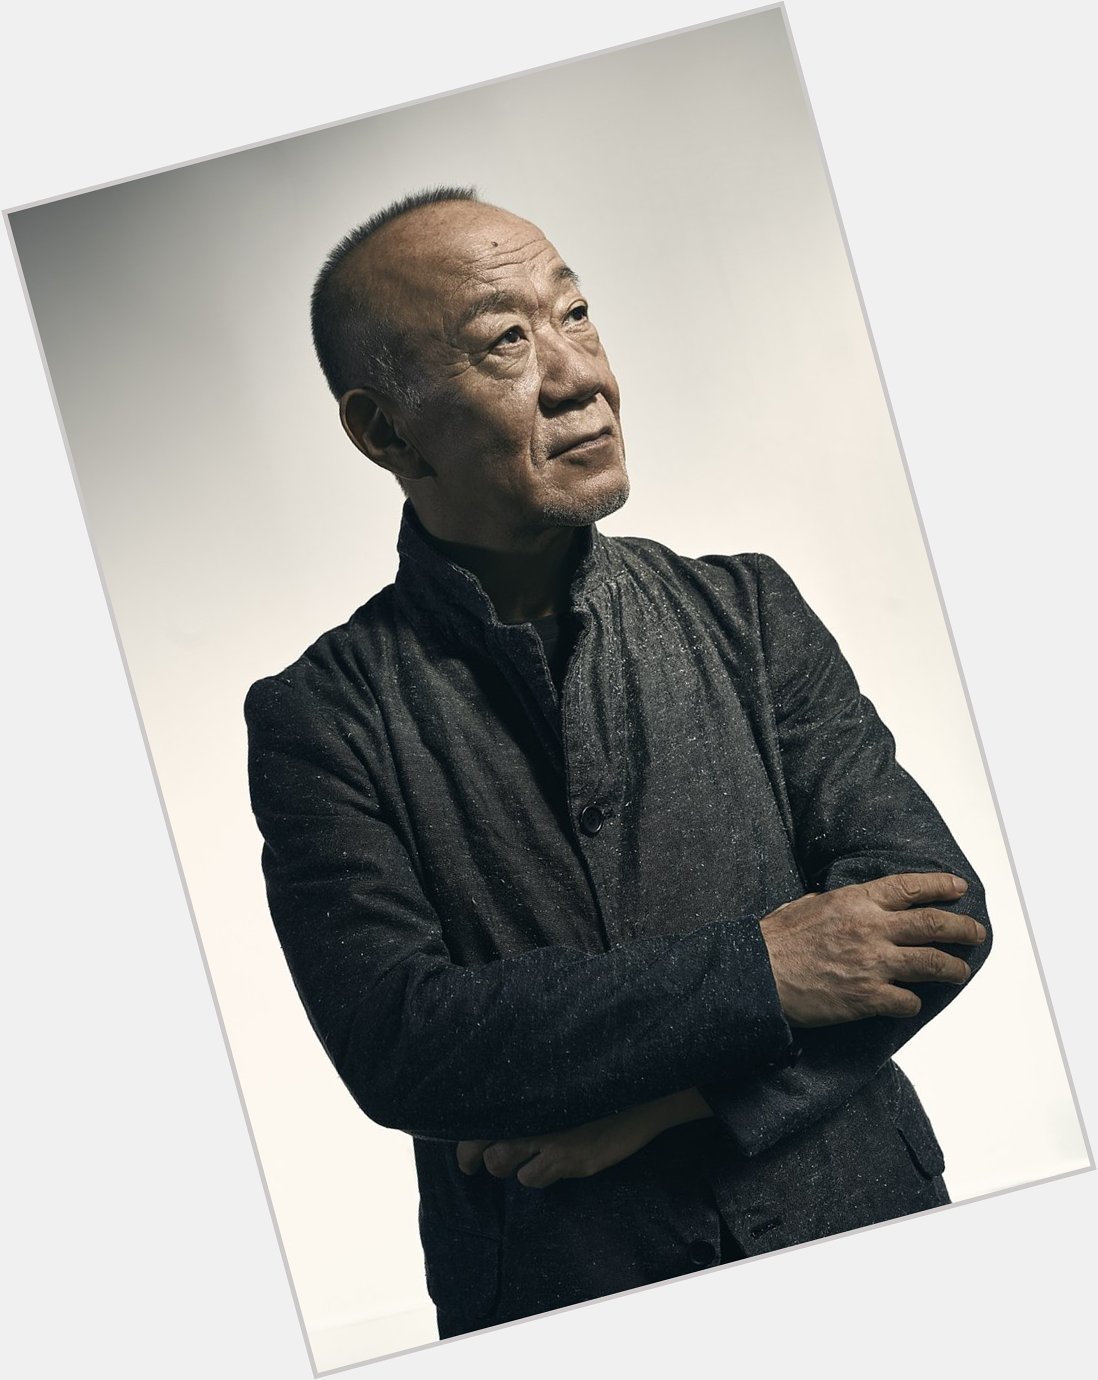                             (^^)

Happy 70th Birthday, Joe Hisaishi !!

So what should we listen to today ? :D 